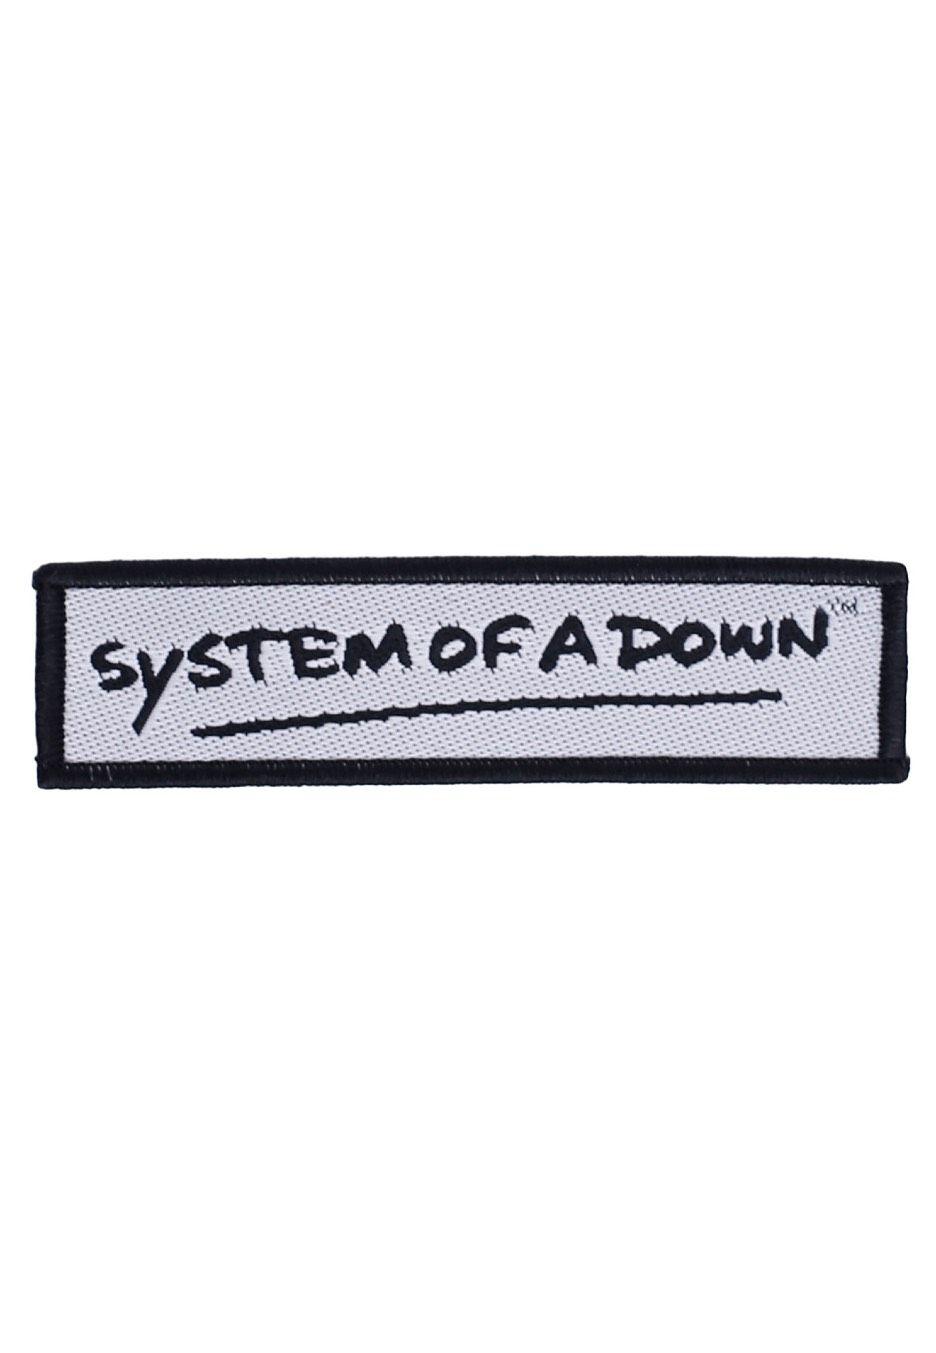 System of a Down Logo - System Of A Down White Screamo Merchandise